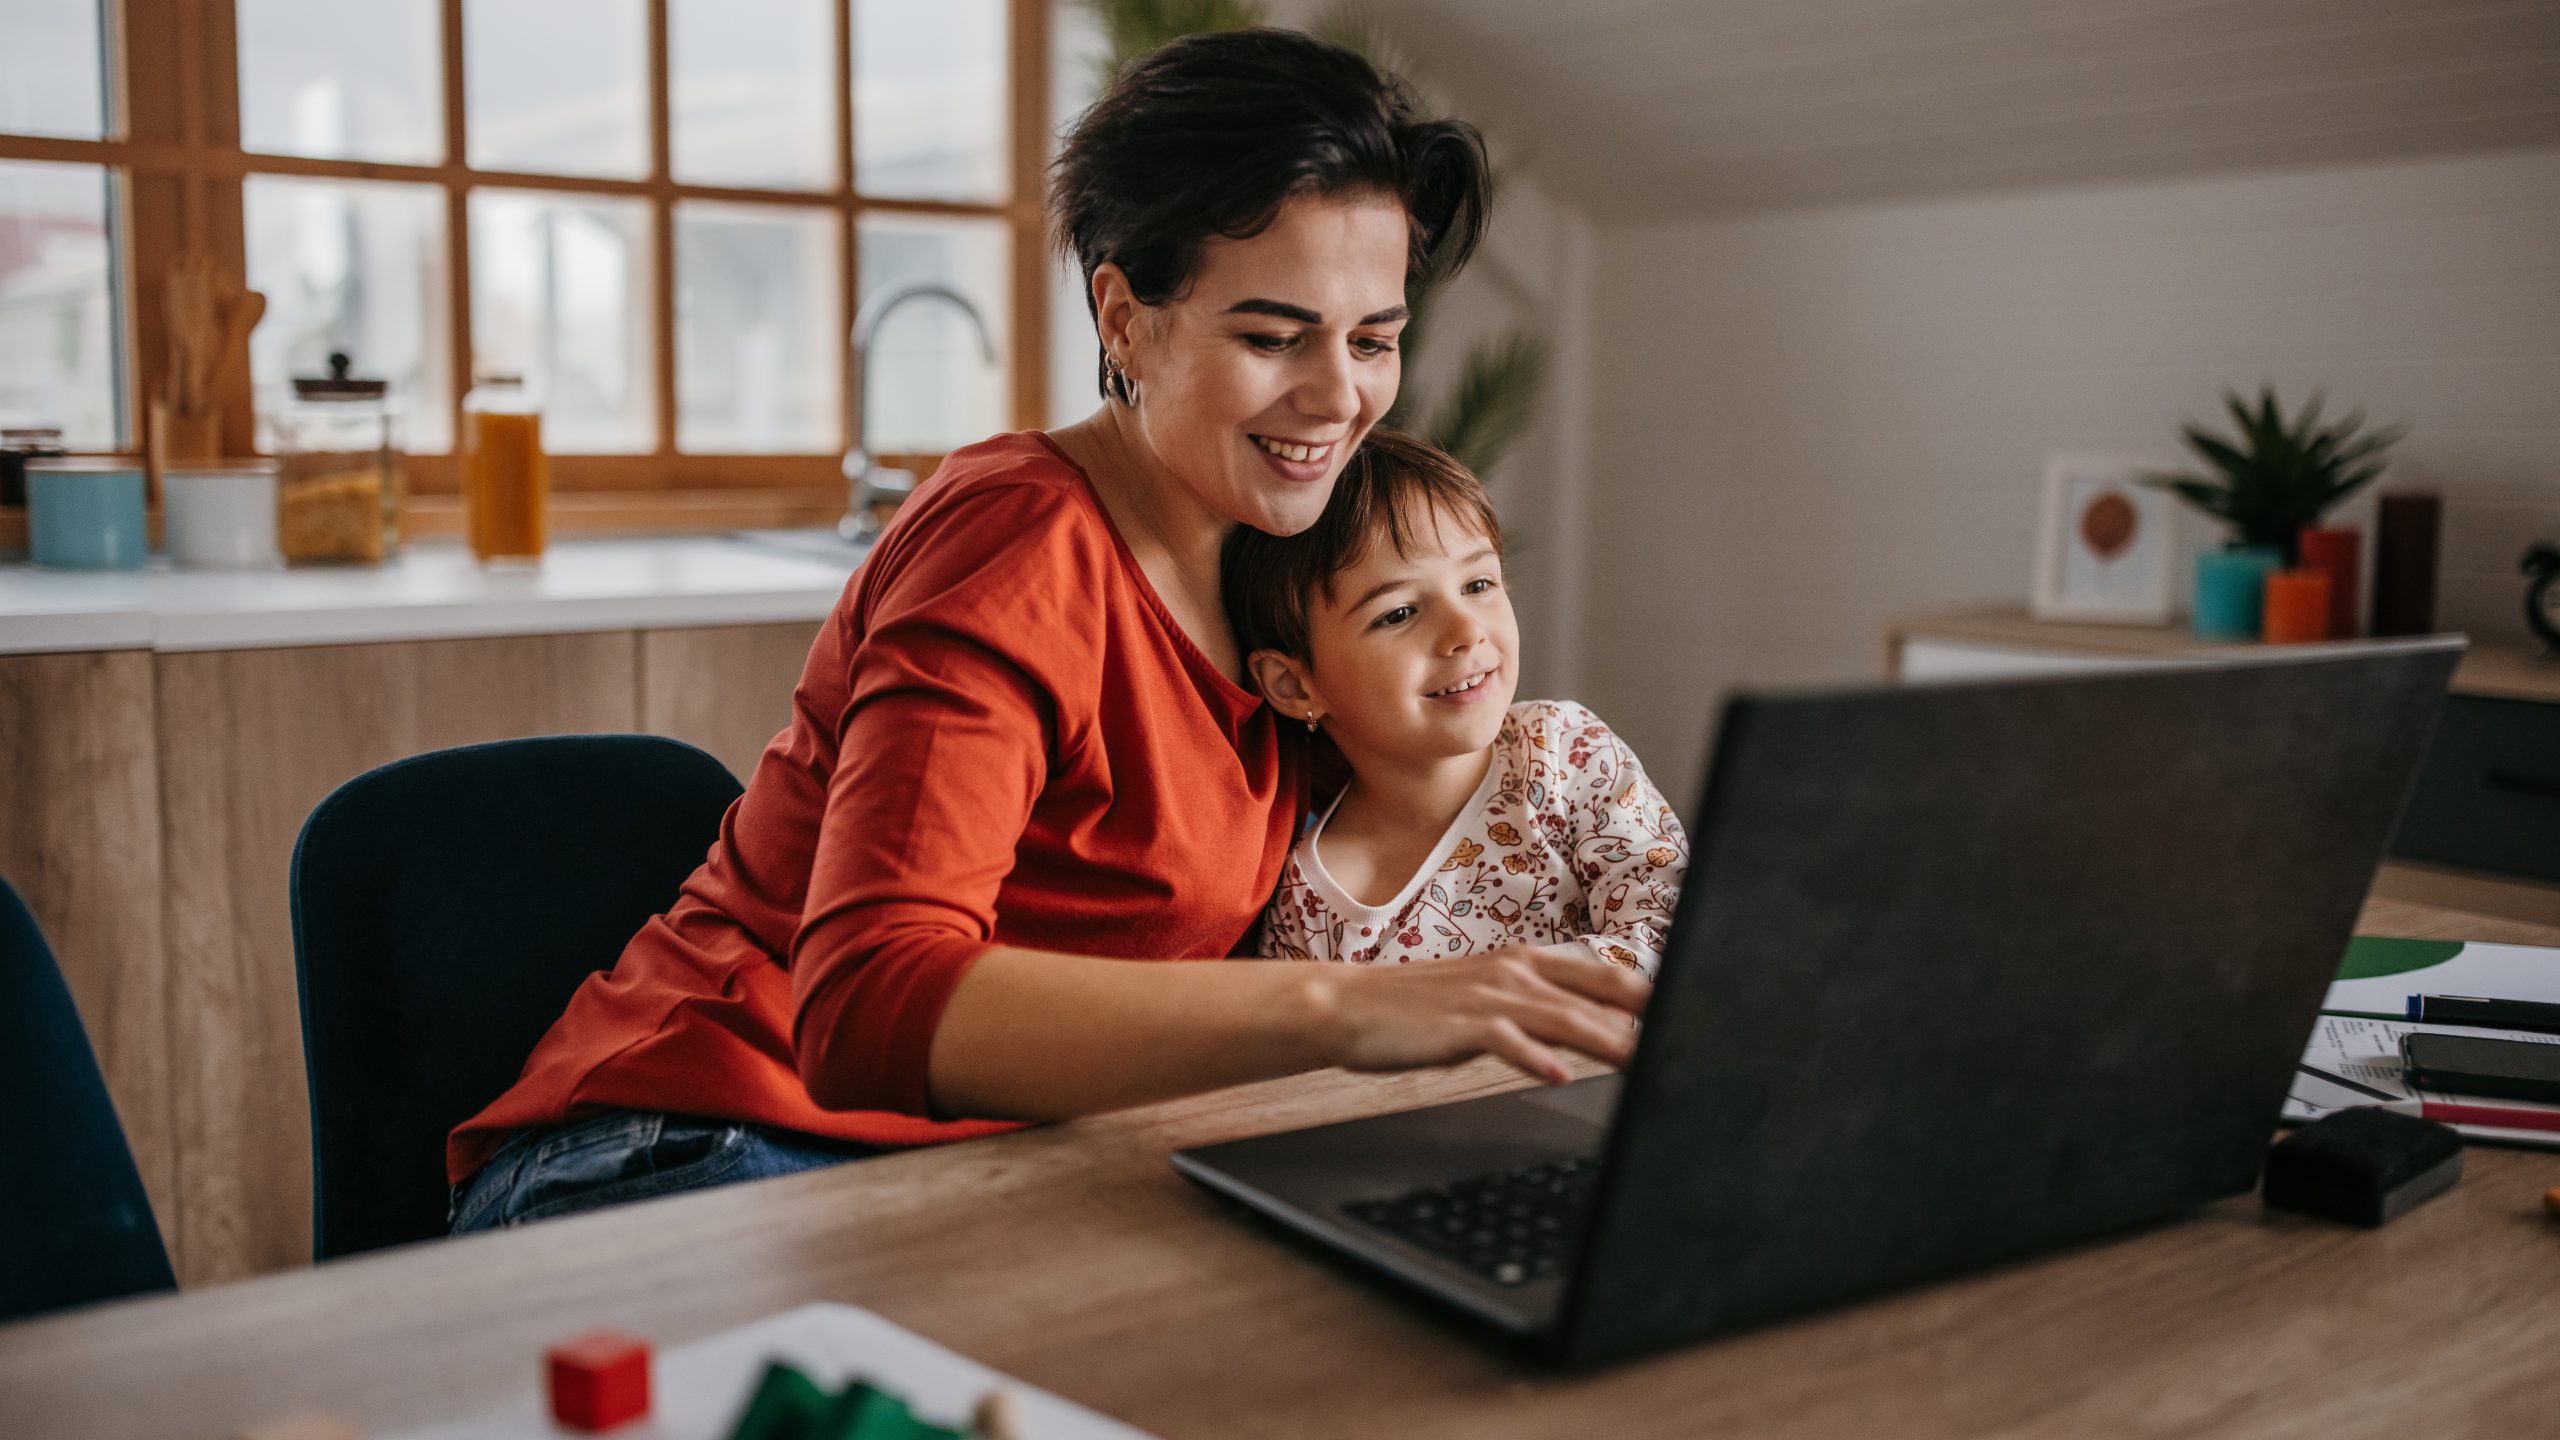 An image of a woman with a child on a computer.